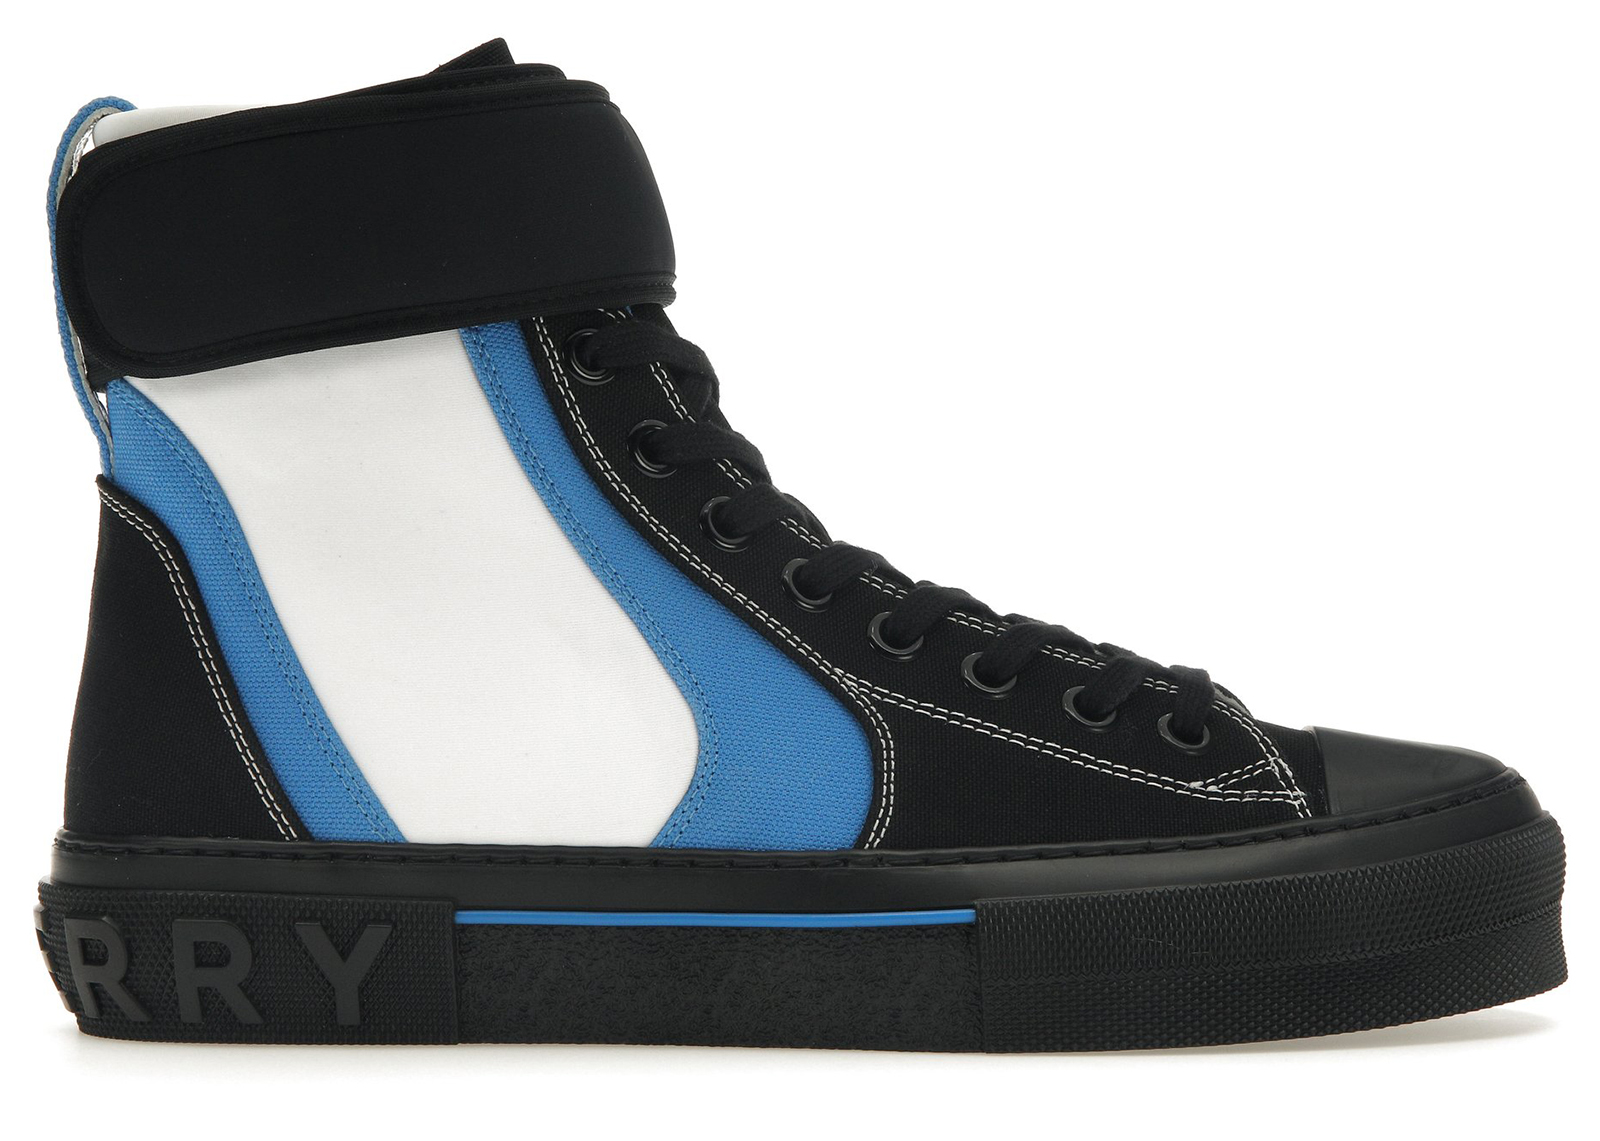 Burberry Sub High-Top Laced-Up Trainer Black Blue White Men's 